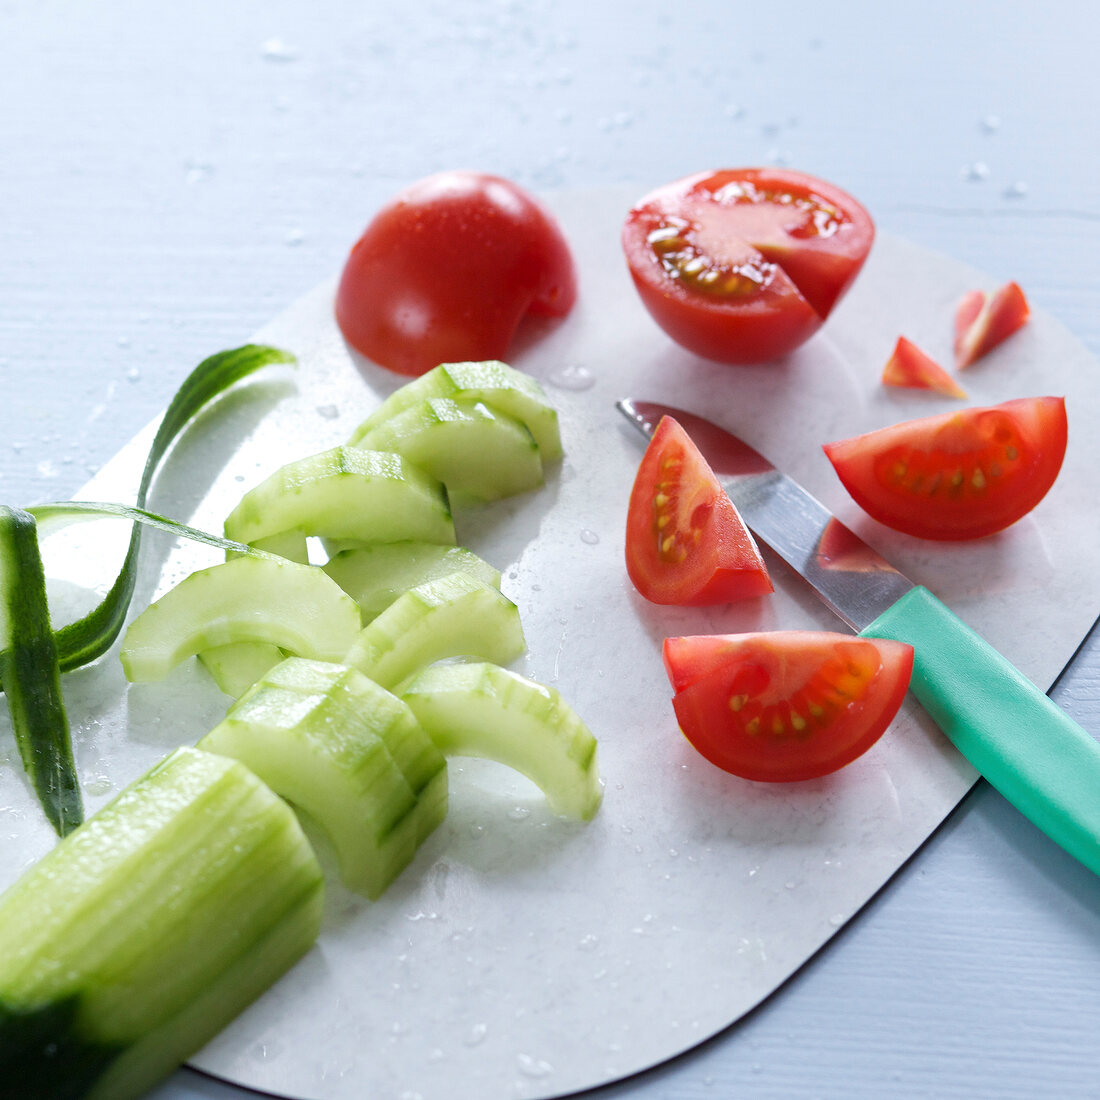 Close-up of tomato and cucumber pieces, step 2